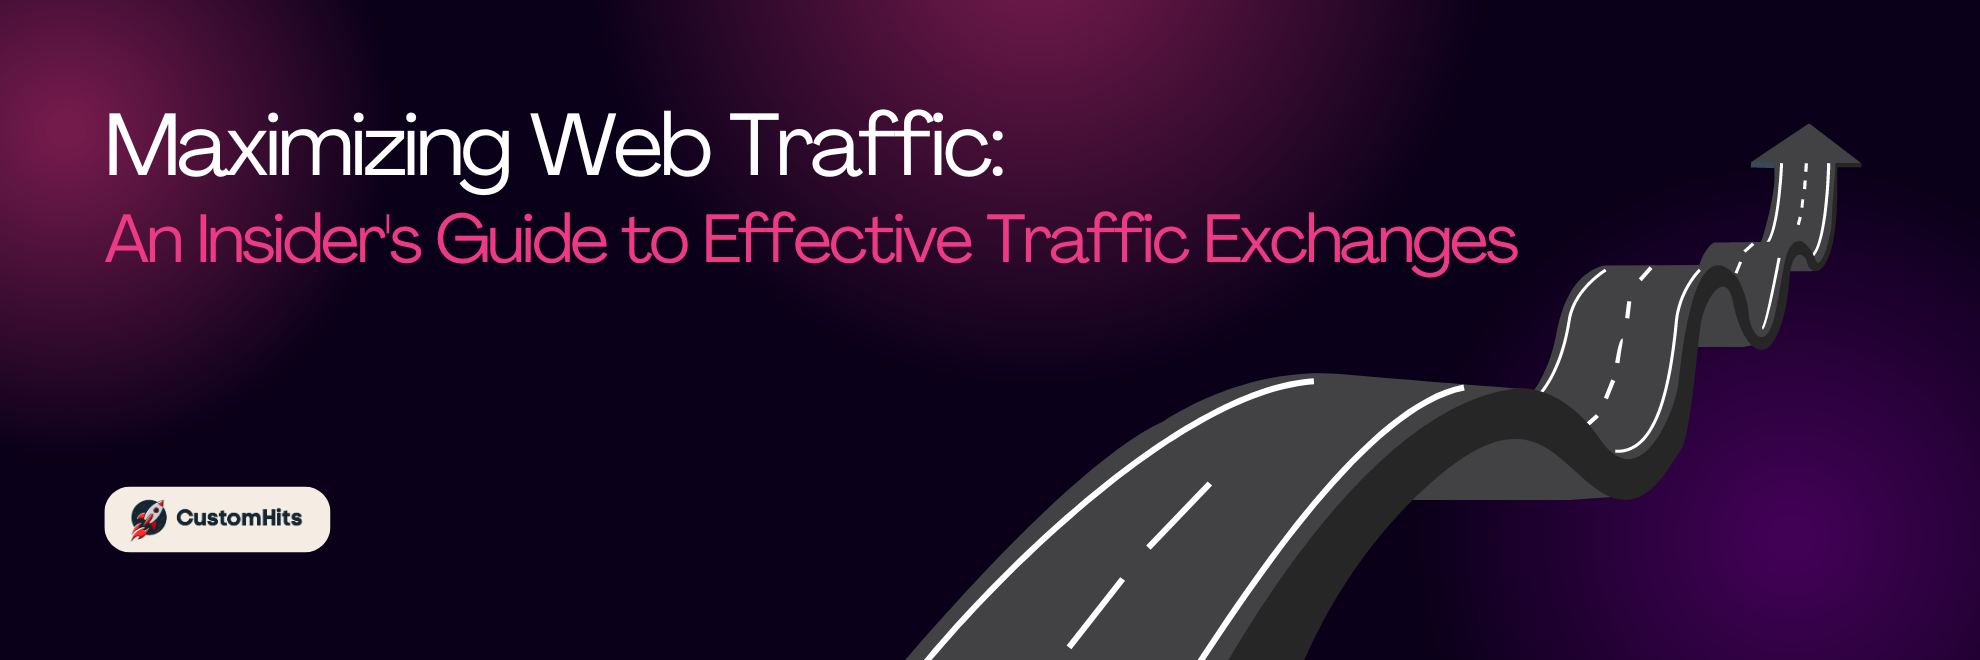 Maximizing Web Traffic: An Insider's Guide to Effective Traffic Exchanges